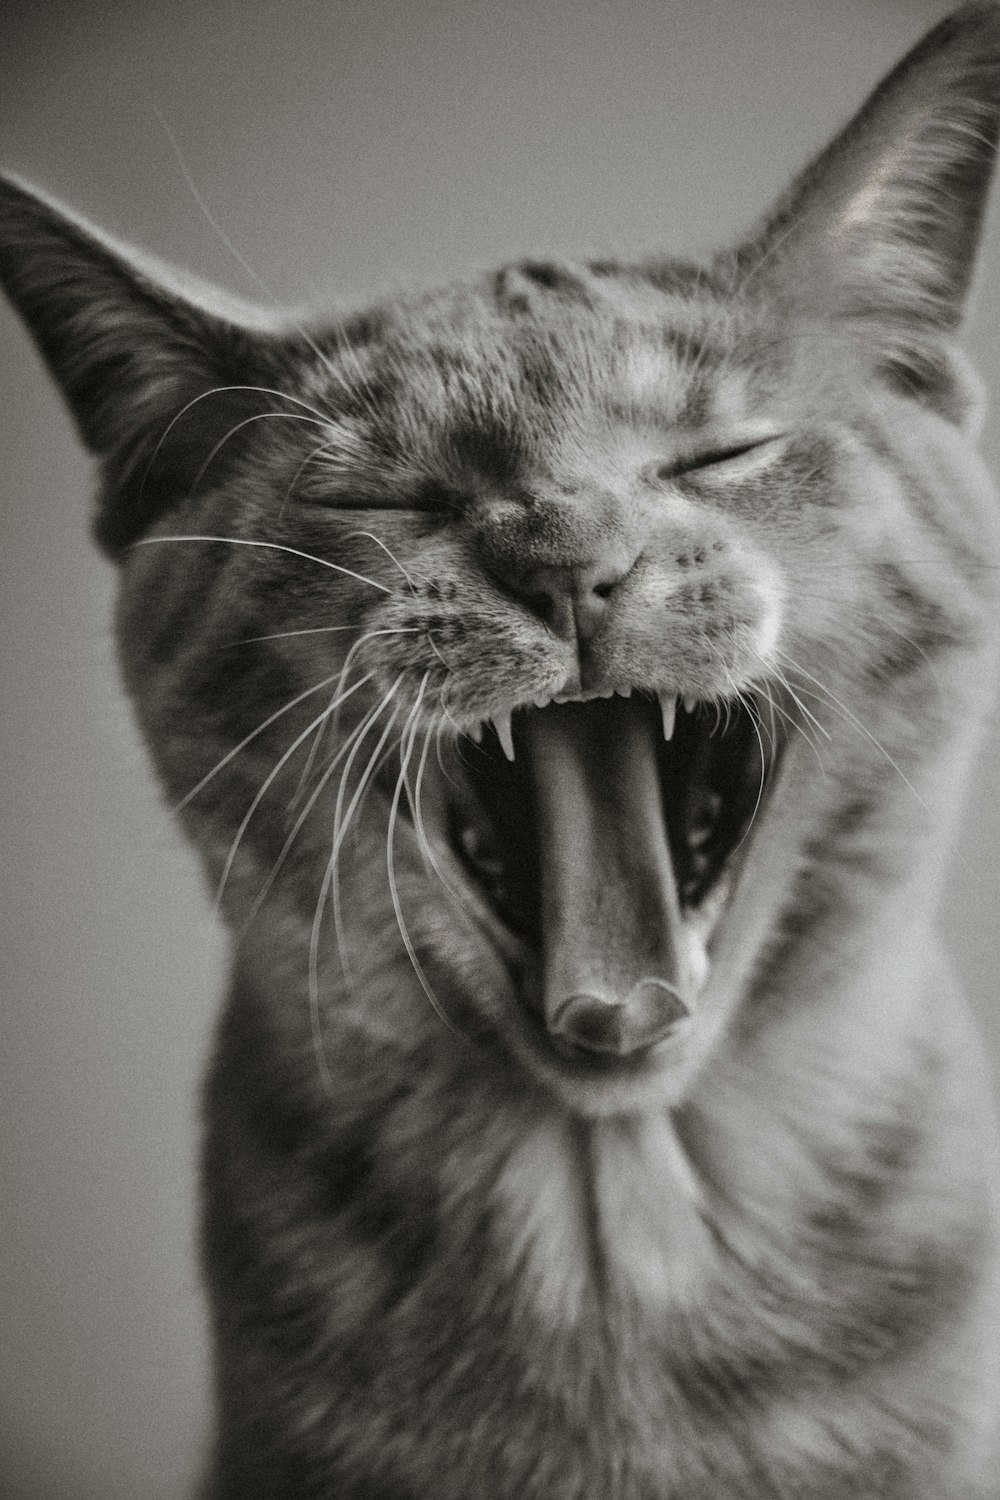 grayscale photo of cat with mouth open